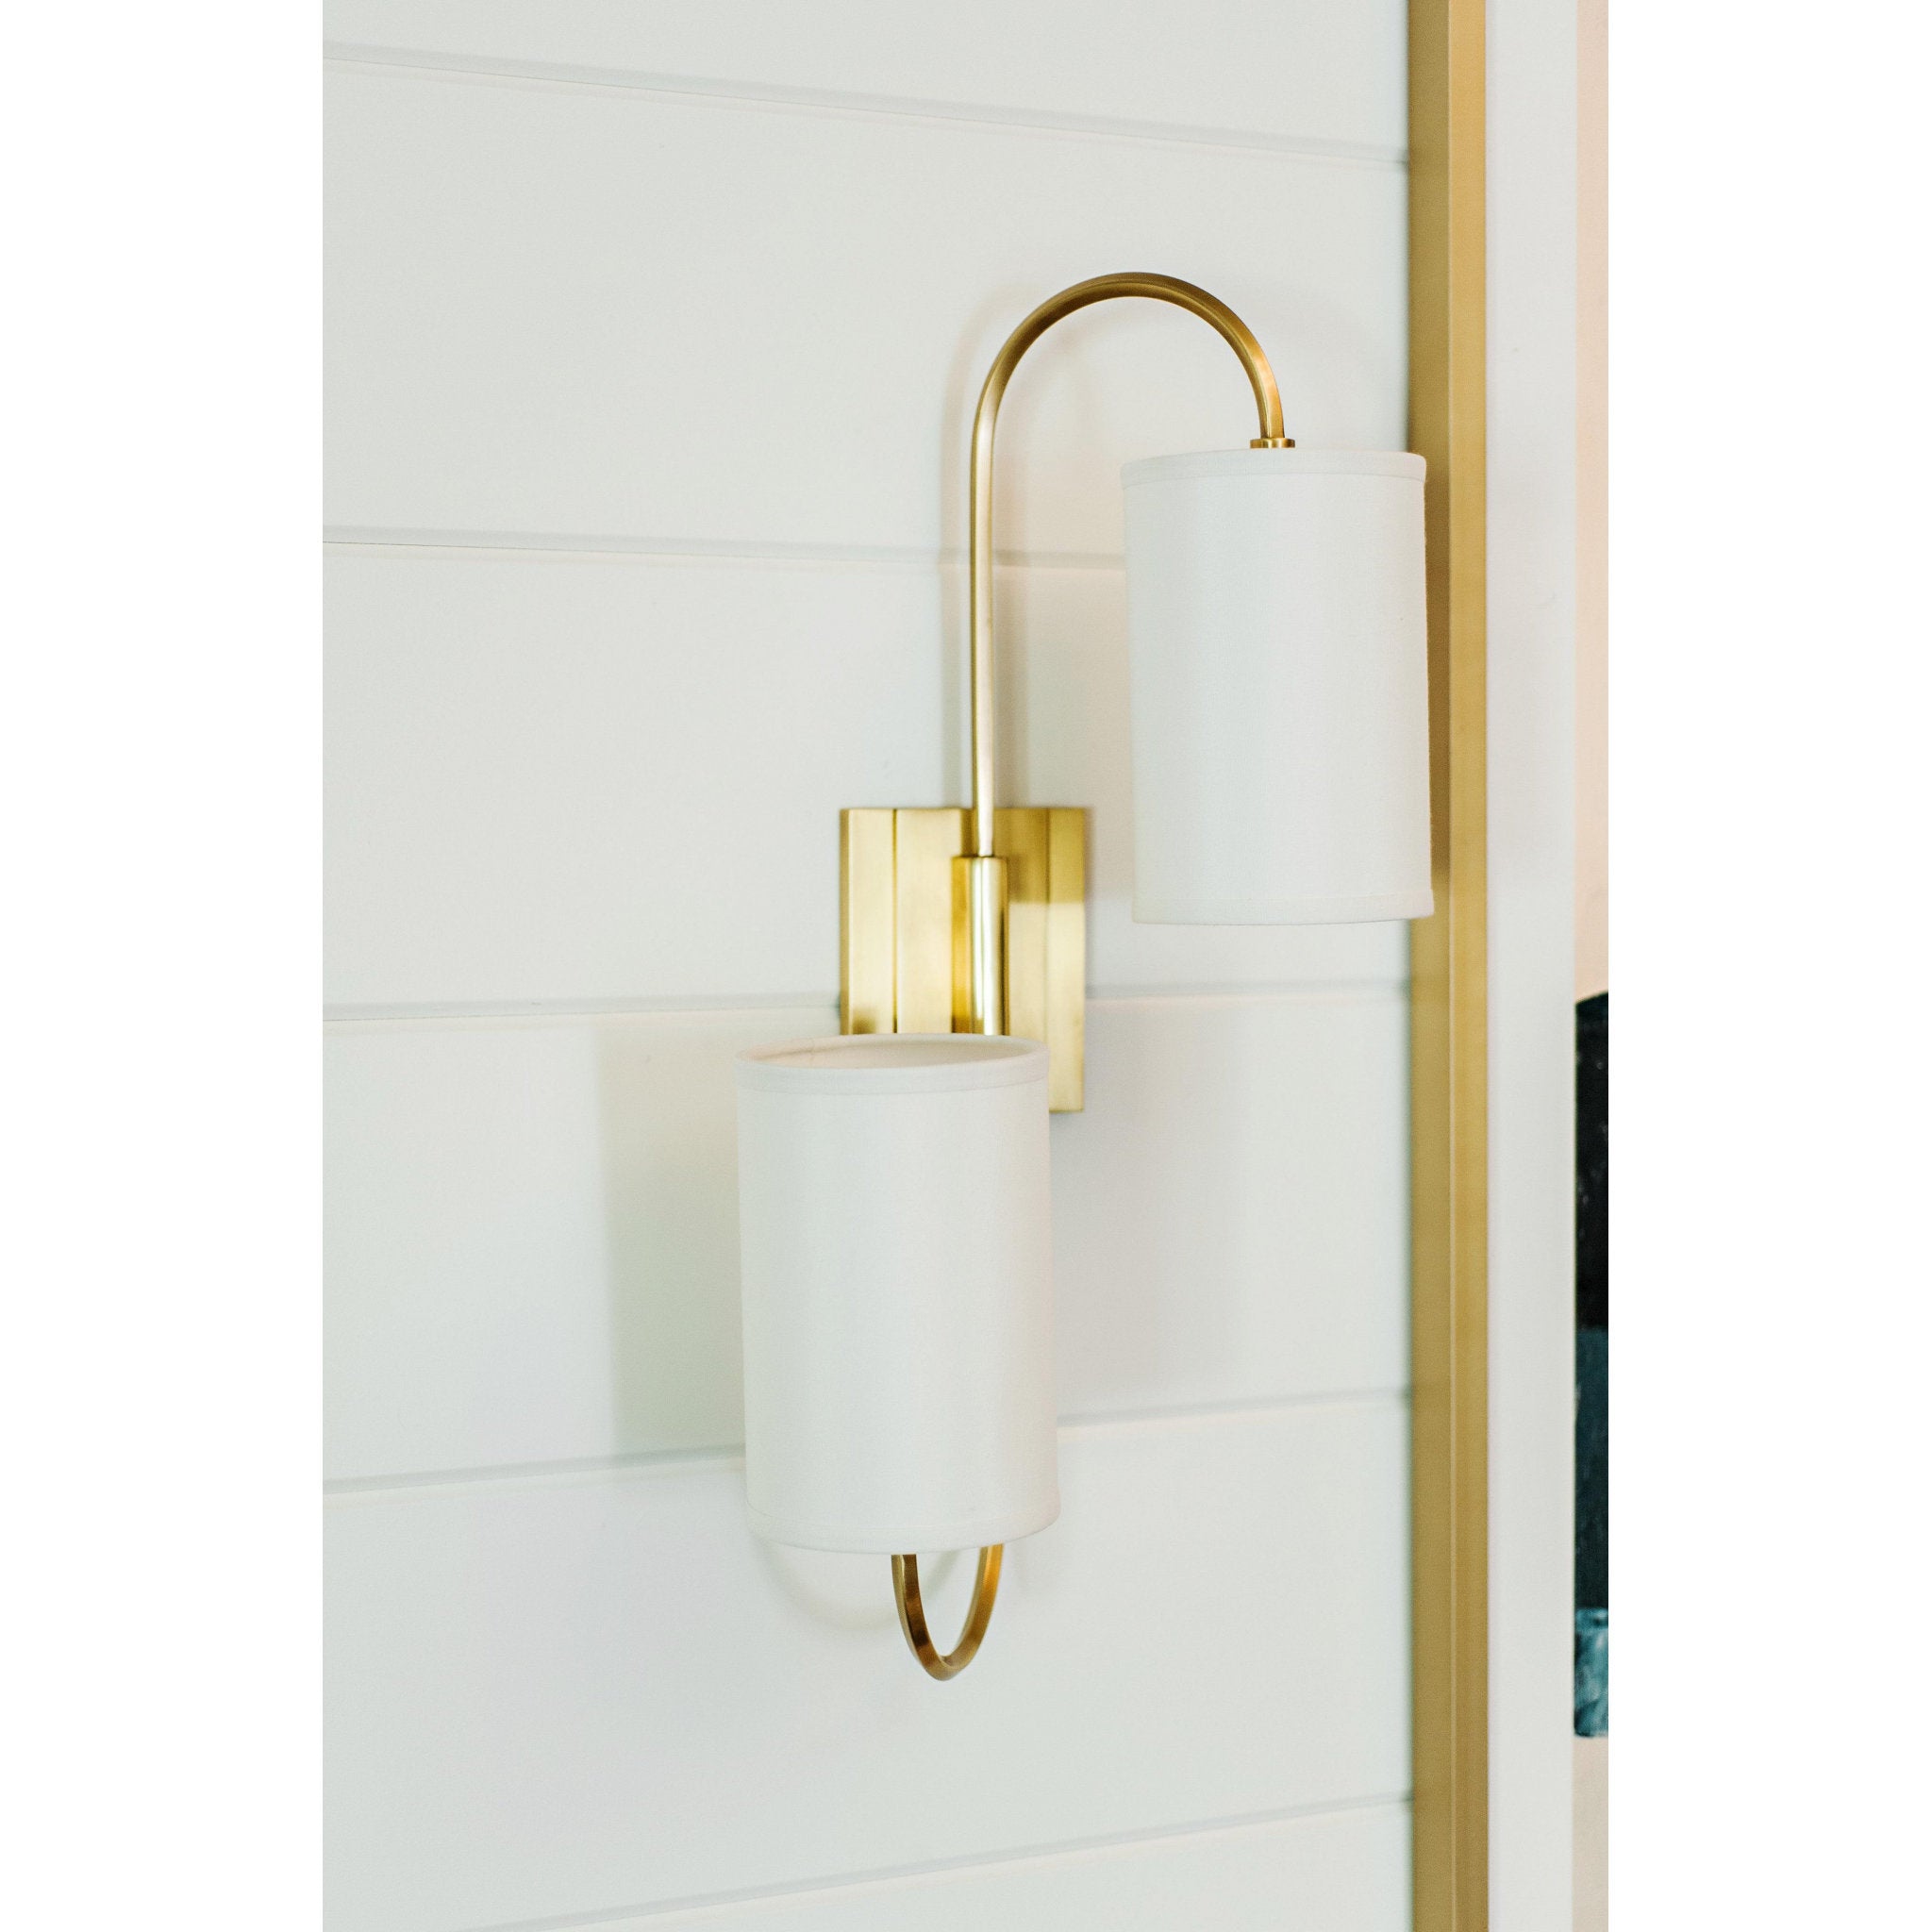 Junius 2 Light Wall Sconce in Aged Brass